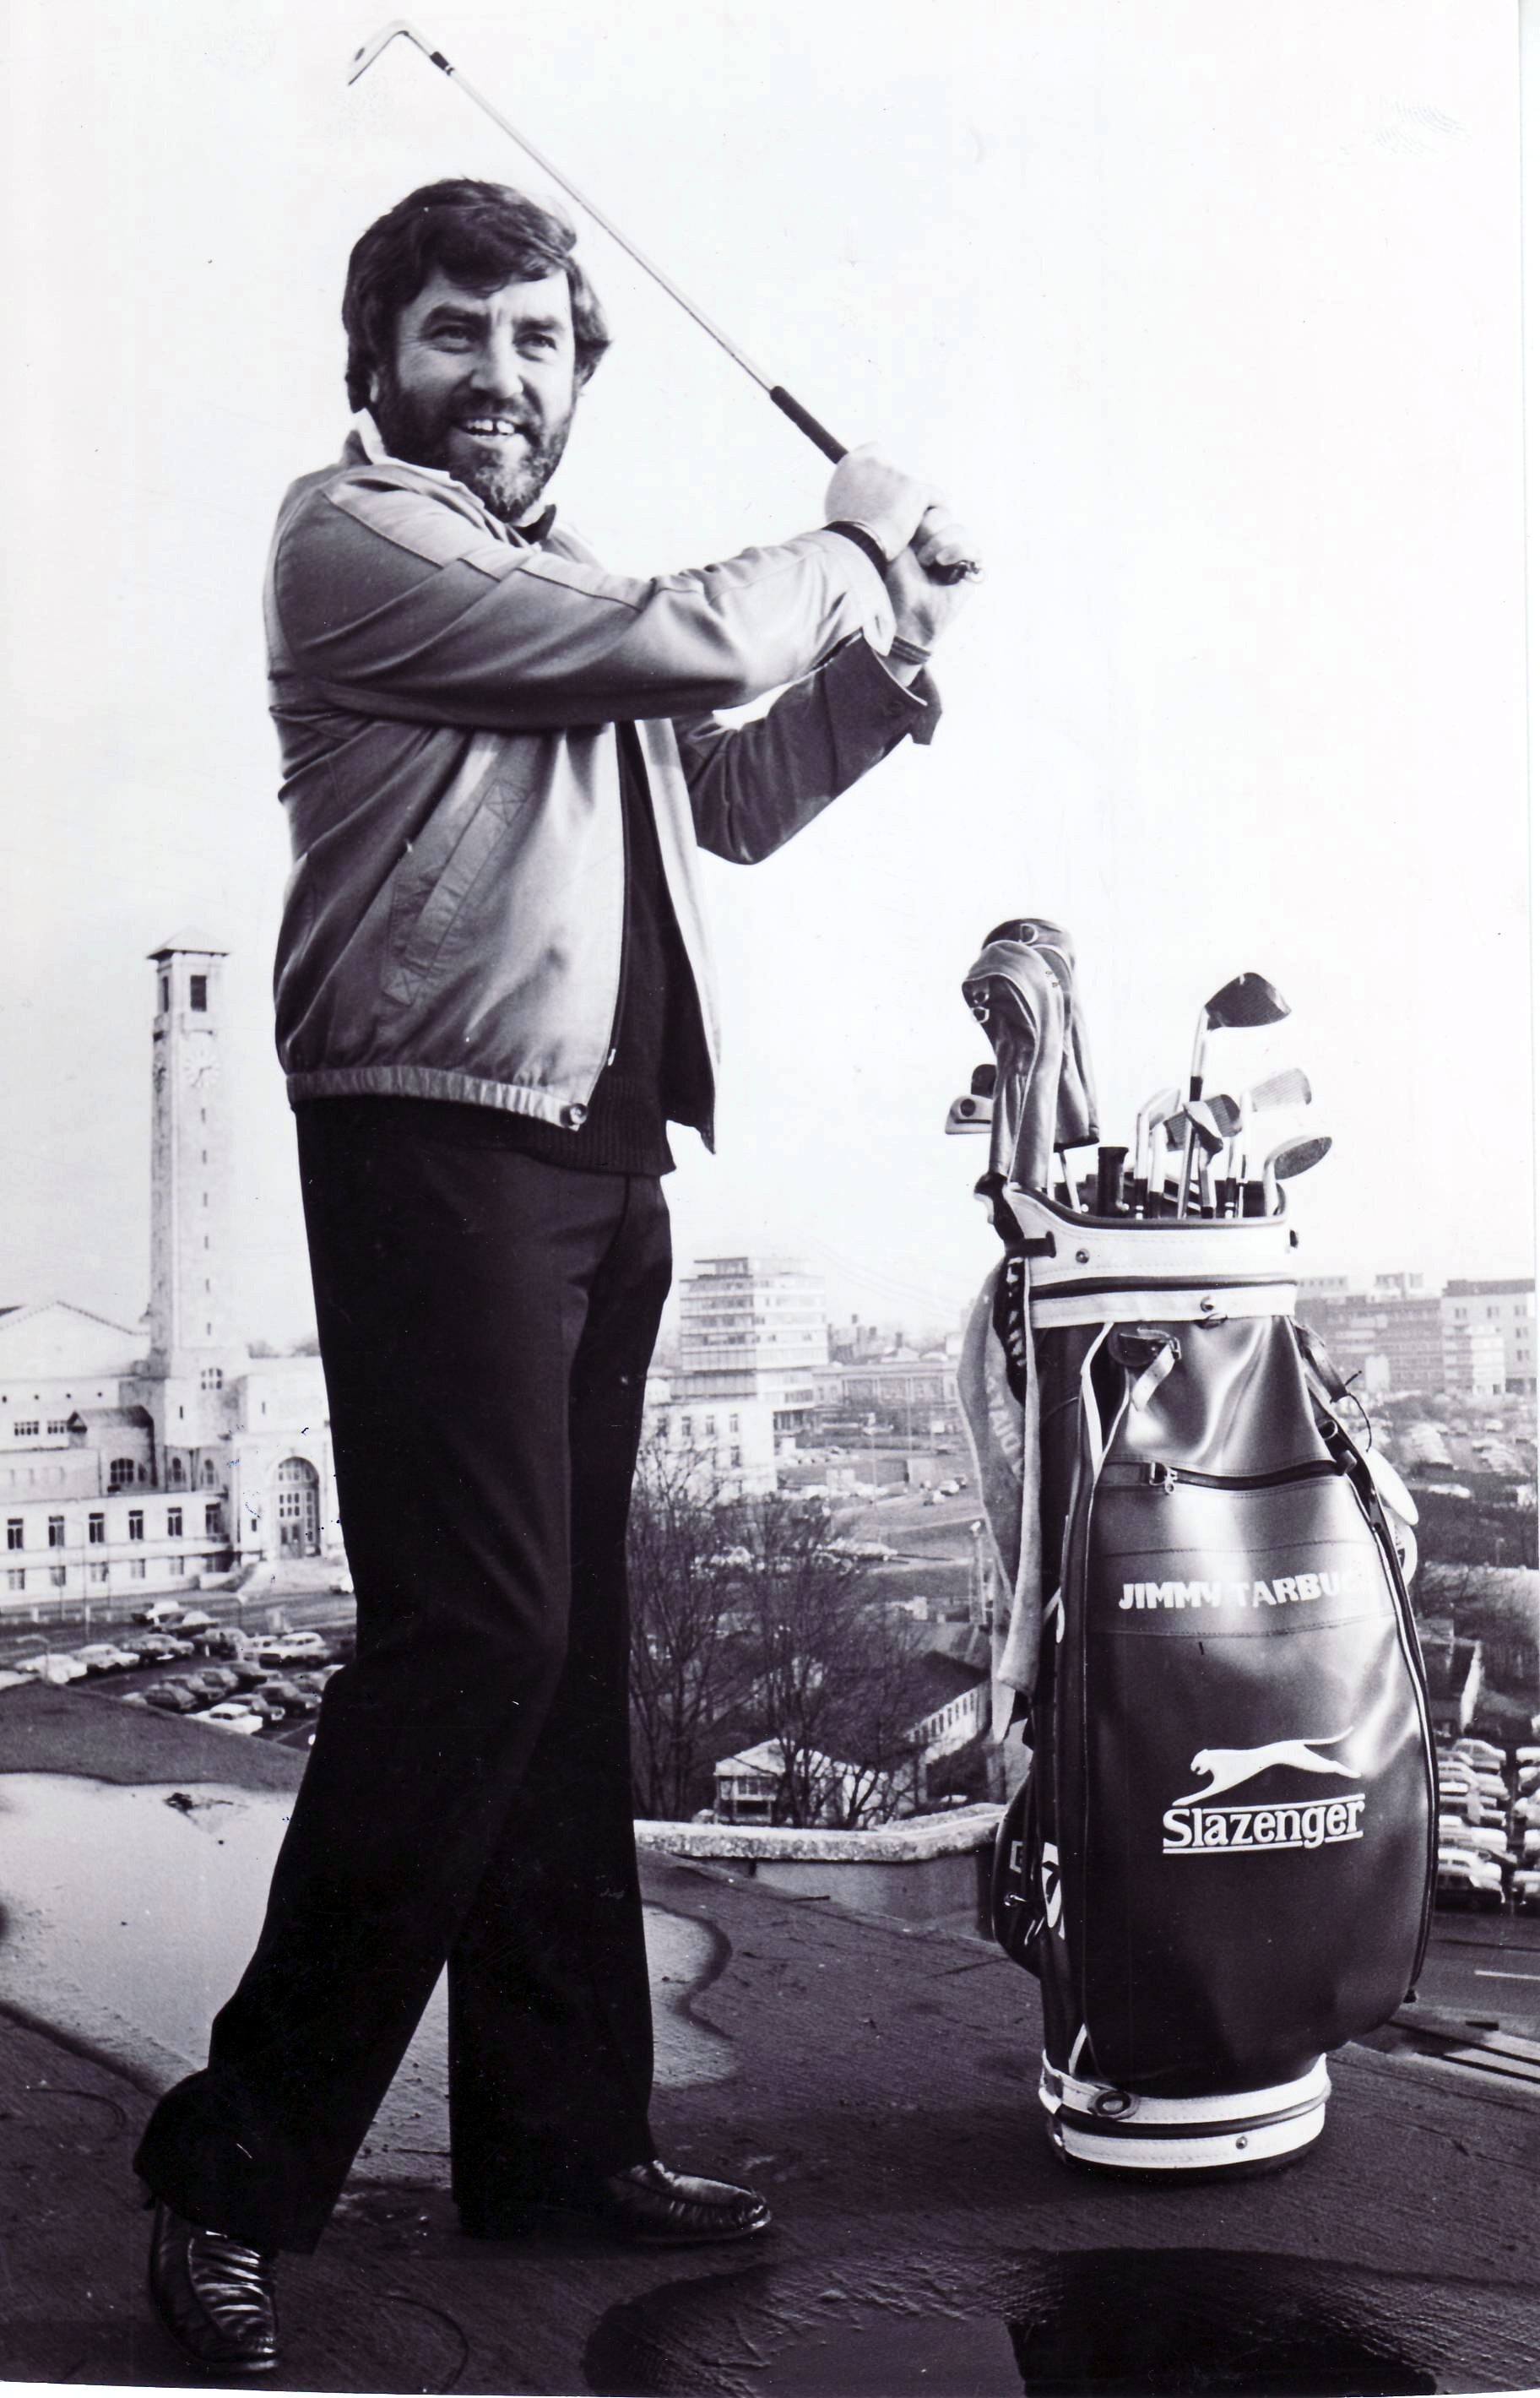 Liverpool comedian and keen golfer Jimmy Tarbuck taking a swing on the roof of tThe Mayflower Theatre - The Gaumont at the time. July 24, 1973.